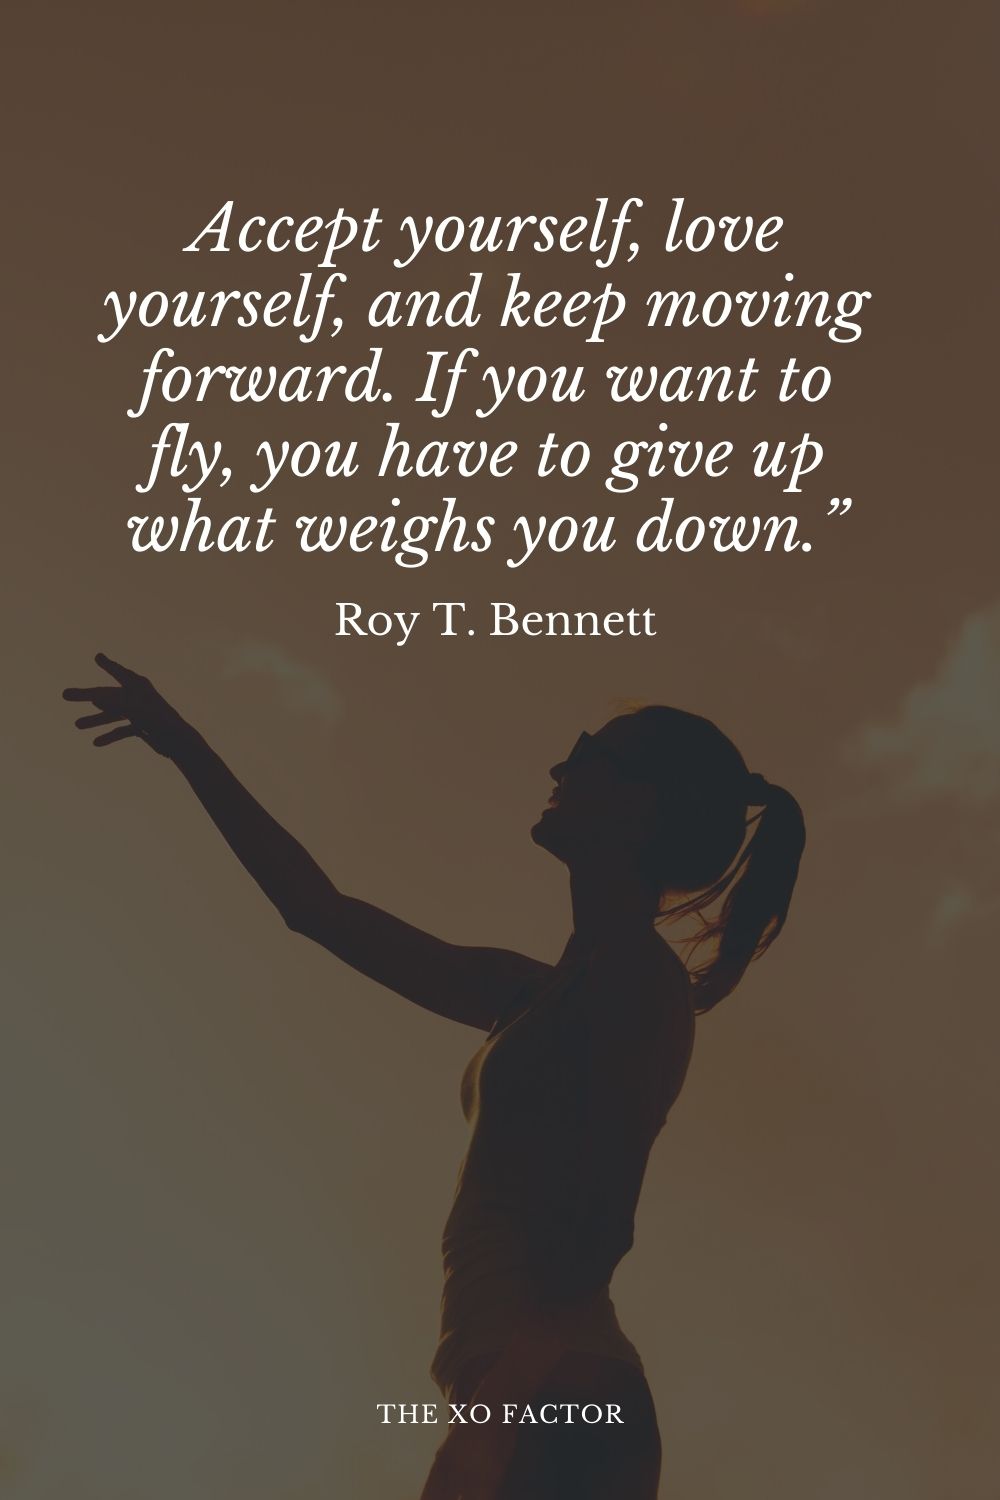 Accept yourself, love yourself, and keep moving forward. If you want to fly, you have to give up what weighs you down.” Roy T. Bennett